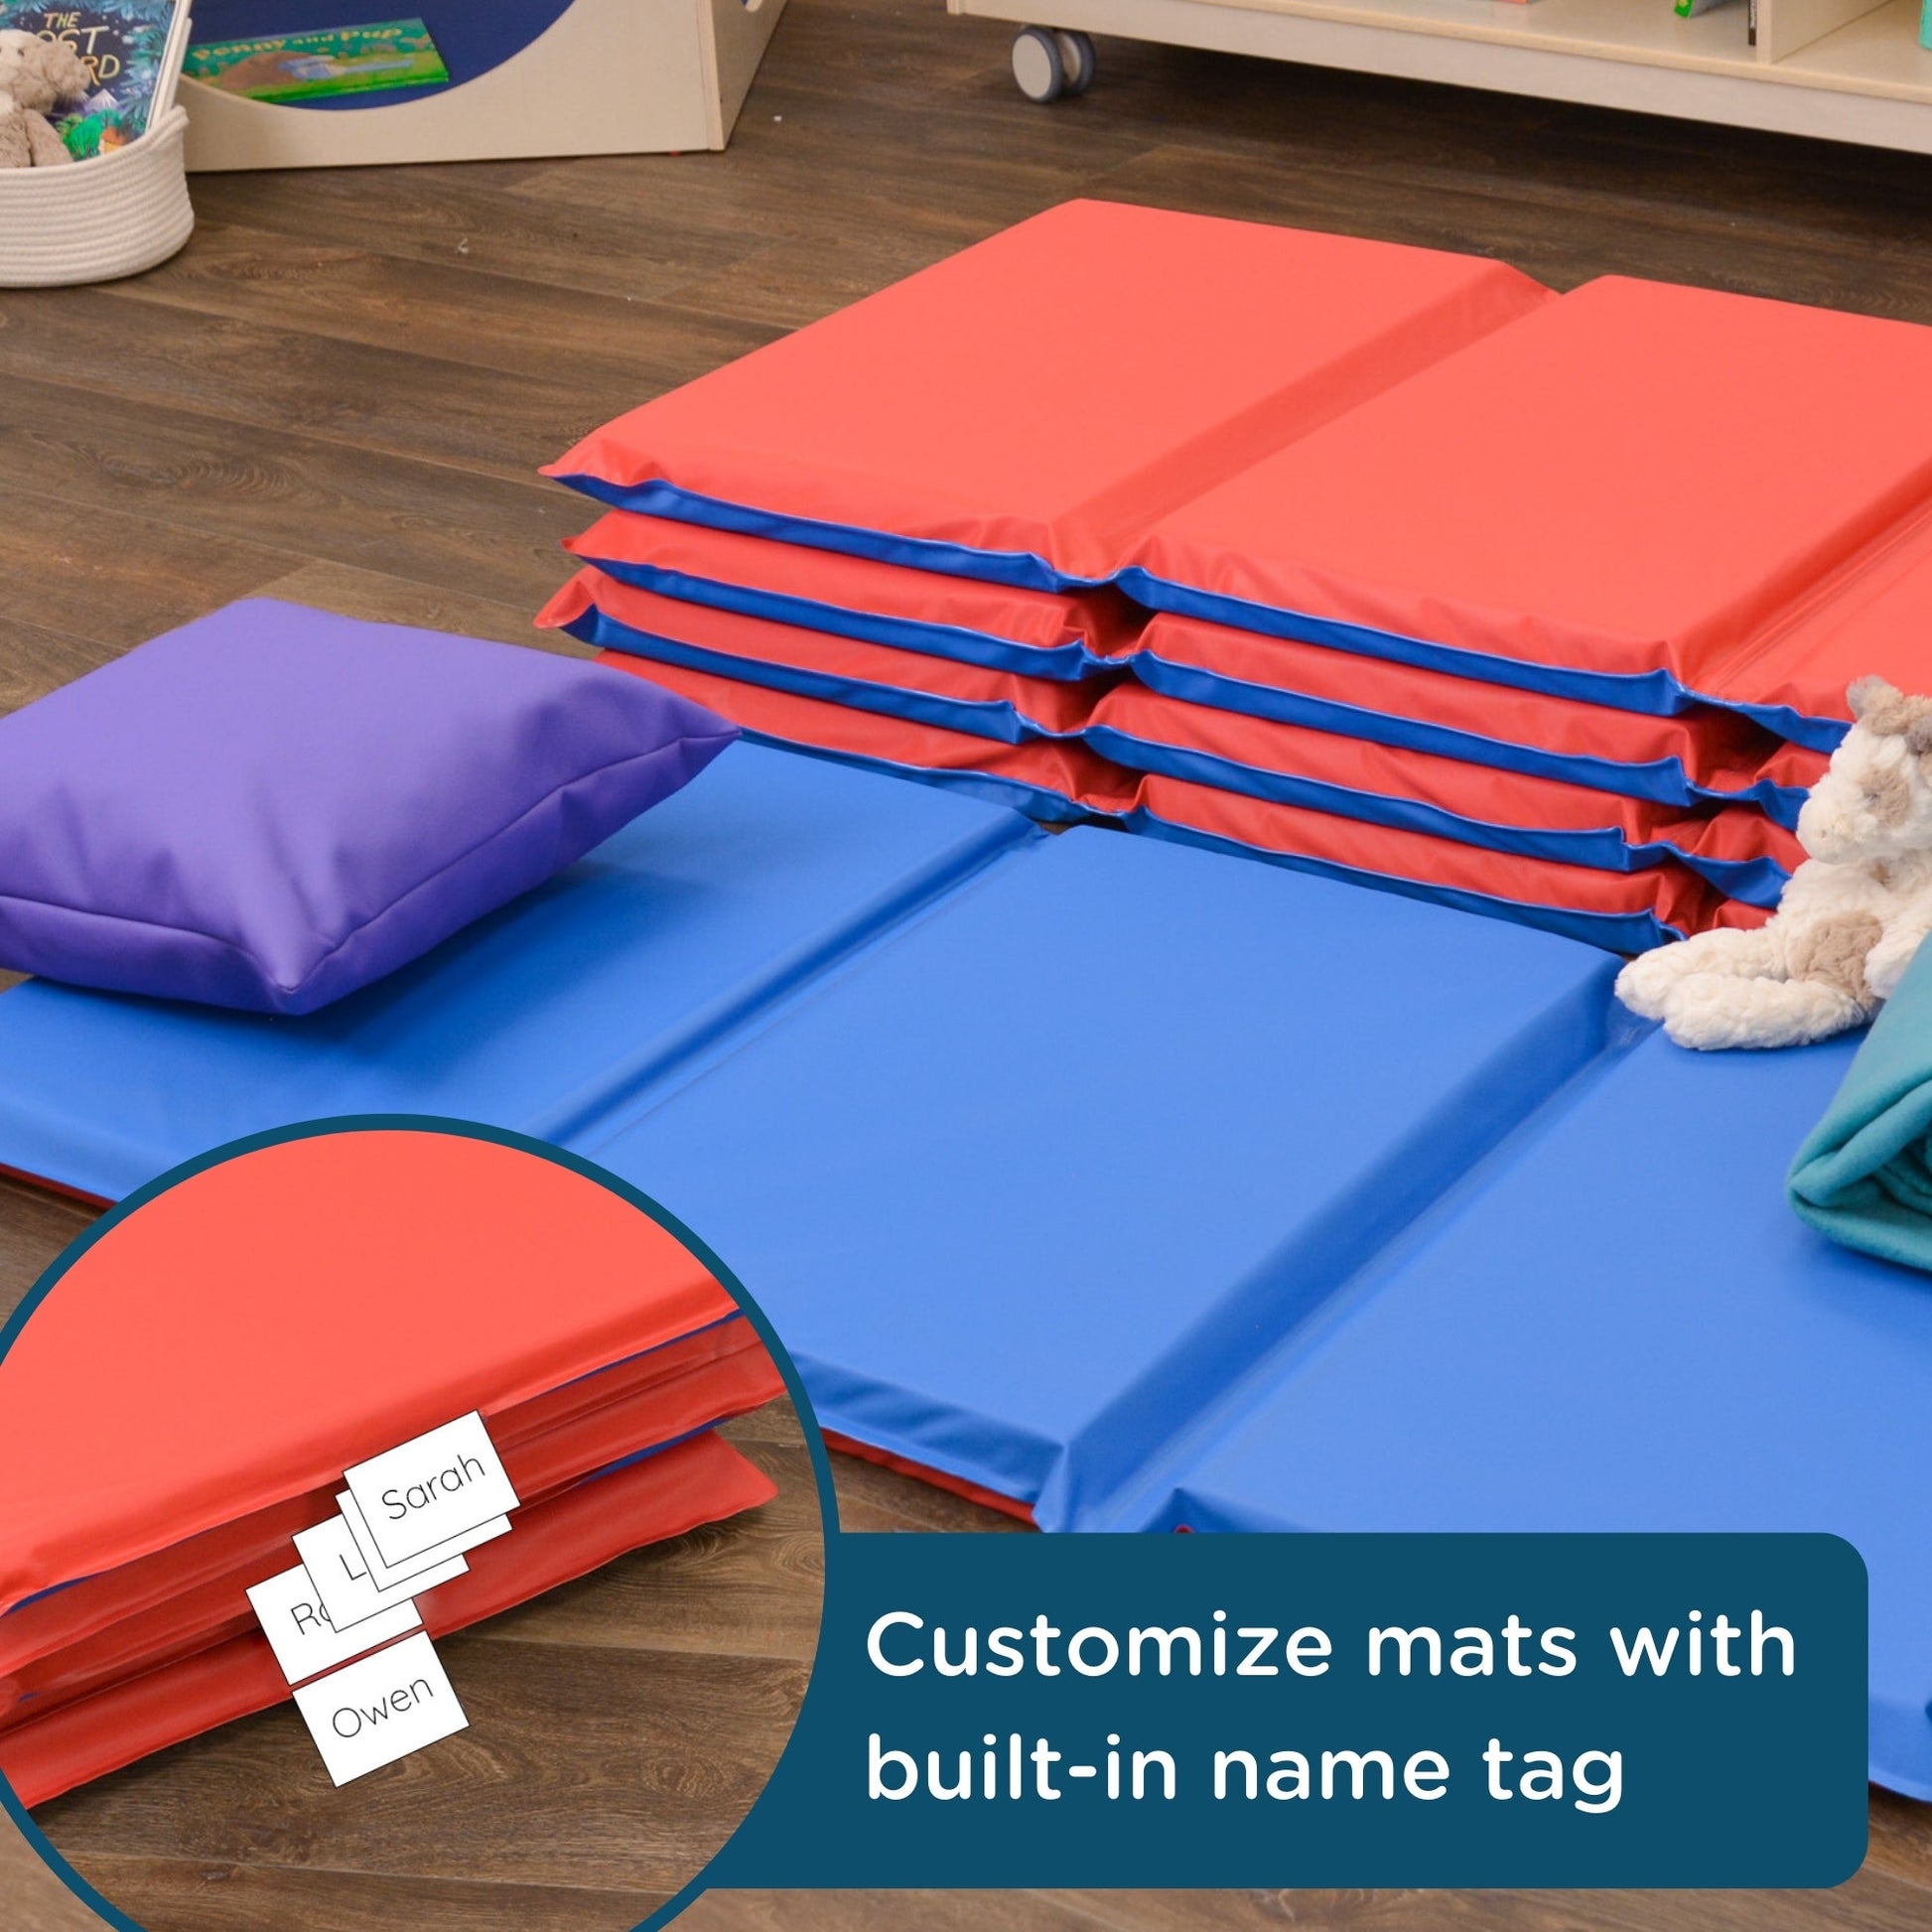 Children's Factory 2" Infection Control 3 Section Folding Rest Mat - Set of 5 - Red/Blue (CF400-513RB) - SchoolOutlet